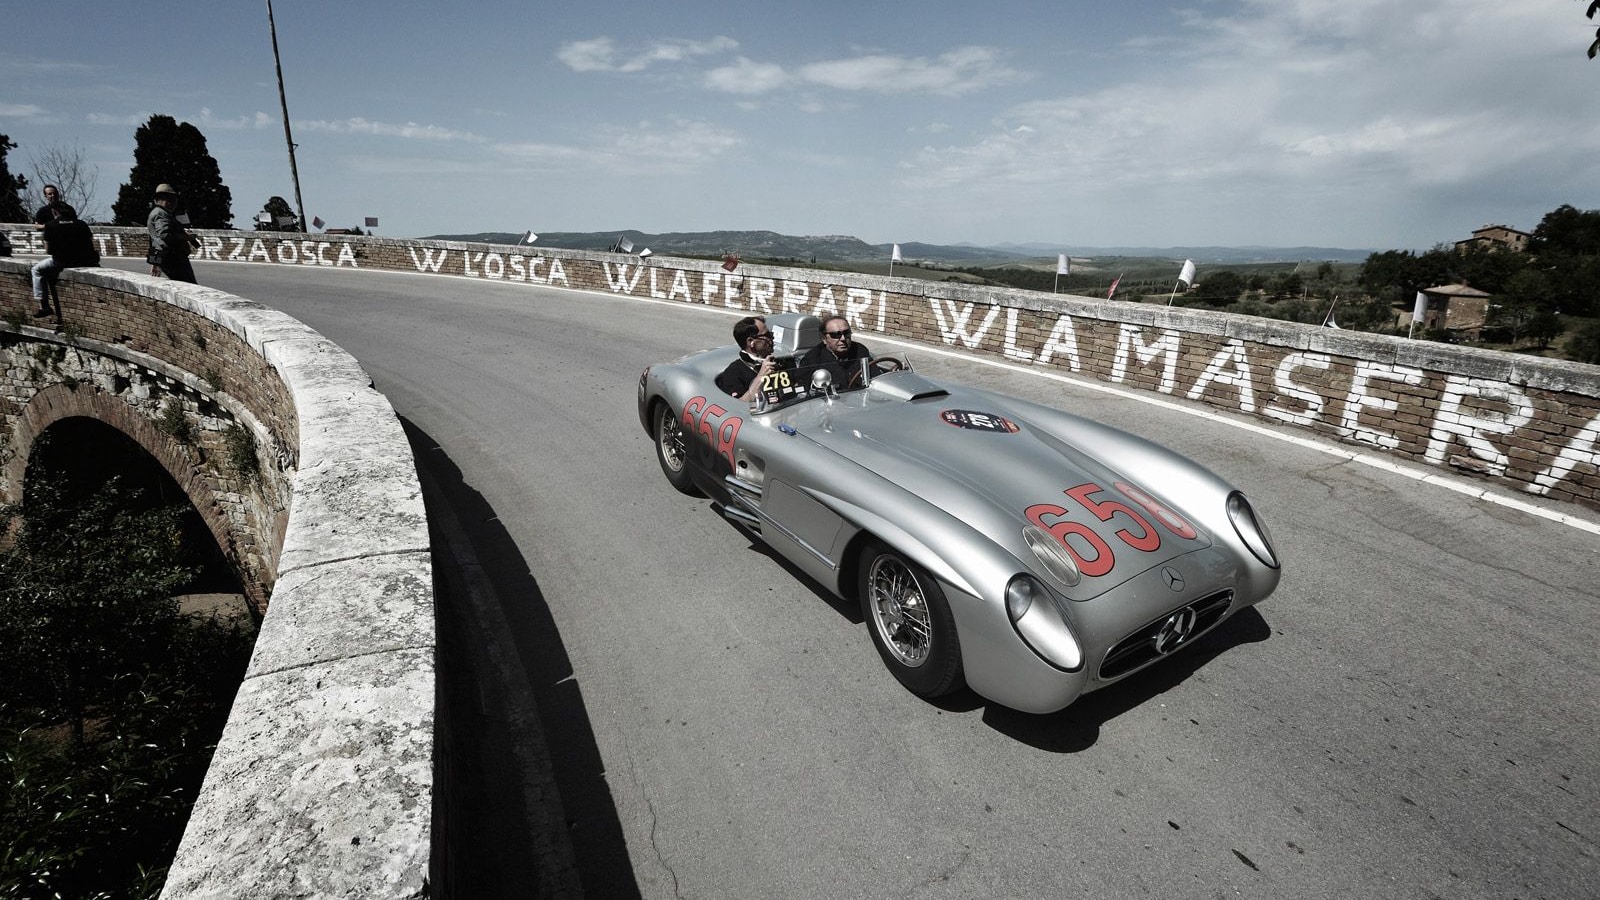 Mercedes-Benz at the Mille Miglia